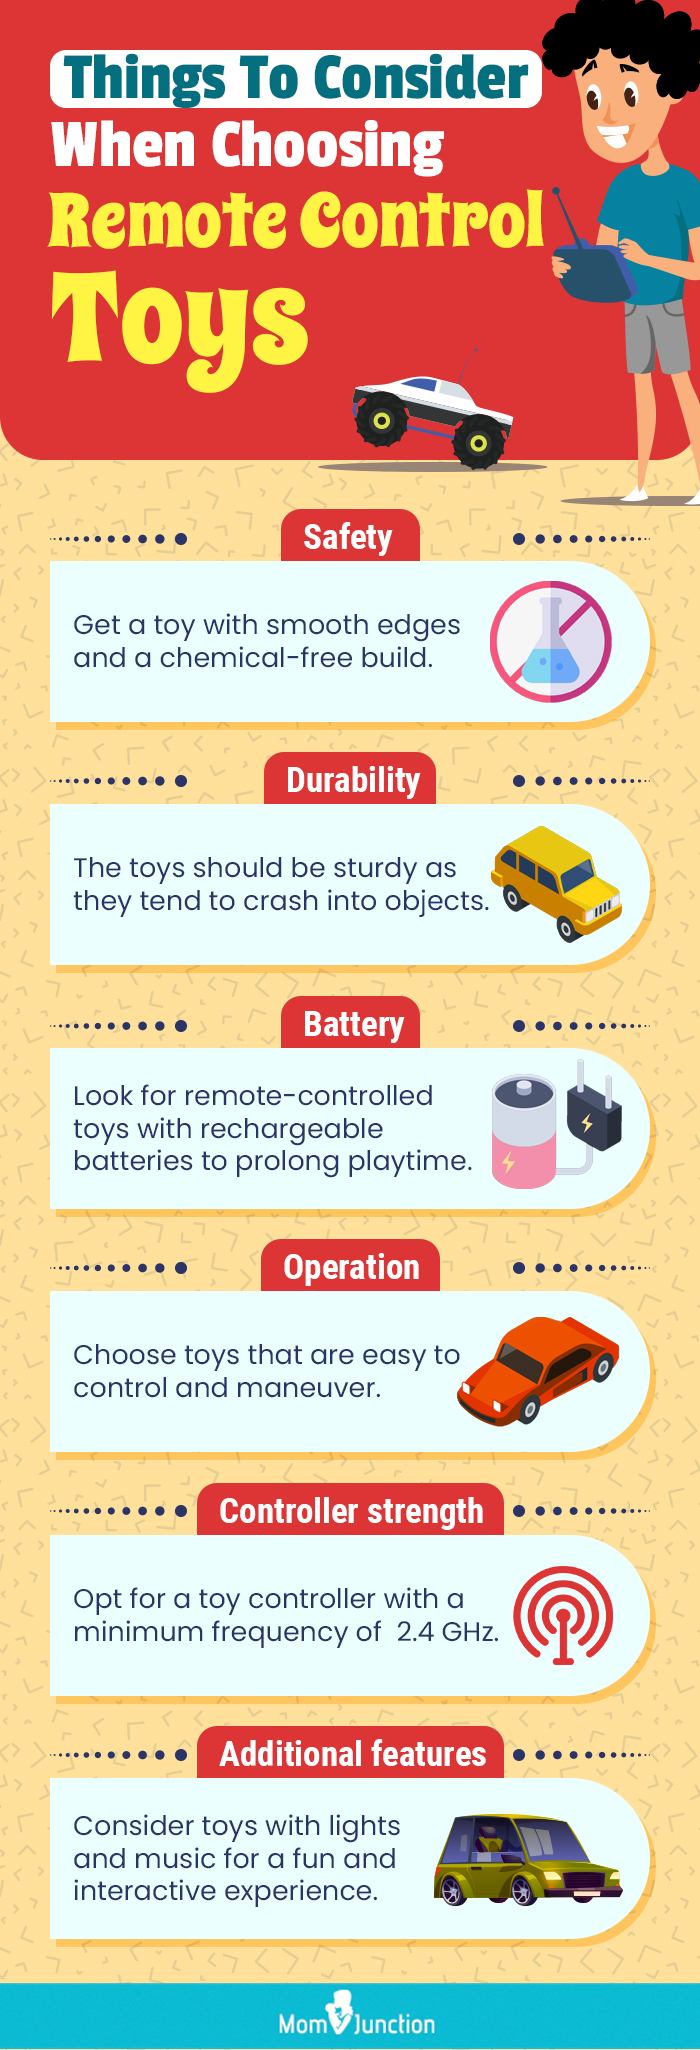 Things To Consider When Choosing Remote Control Toys